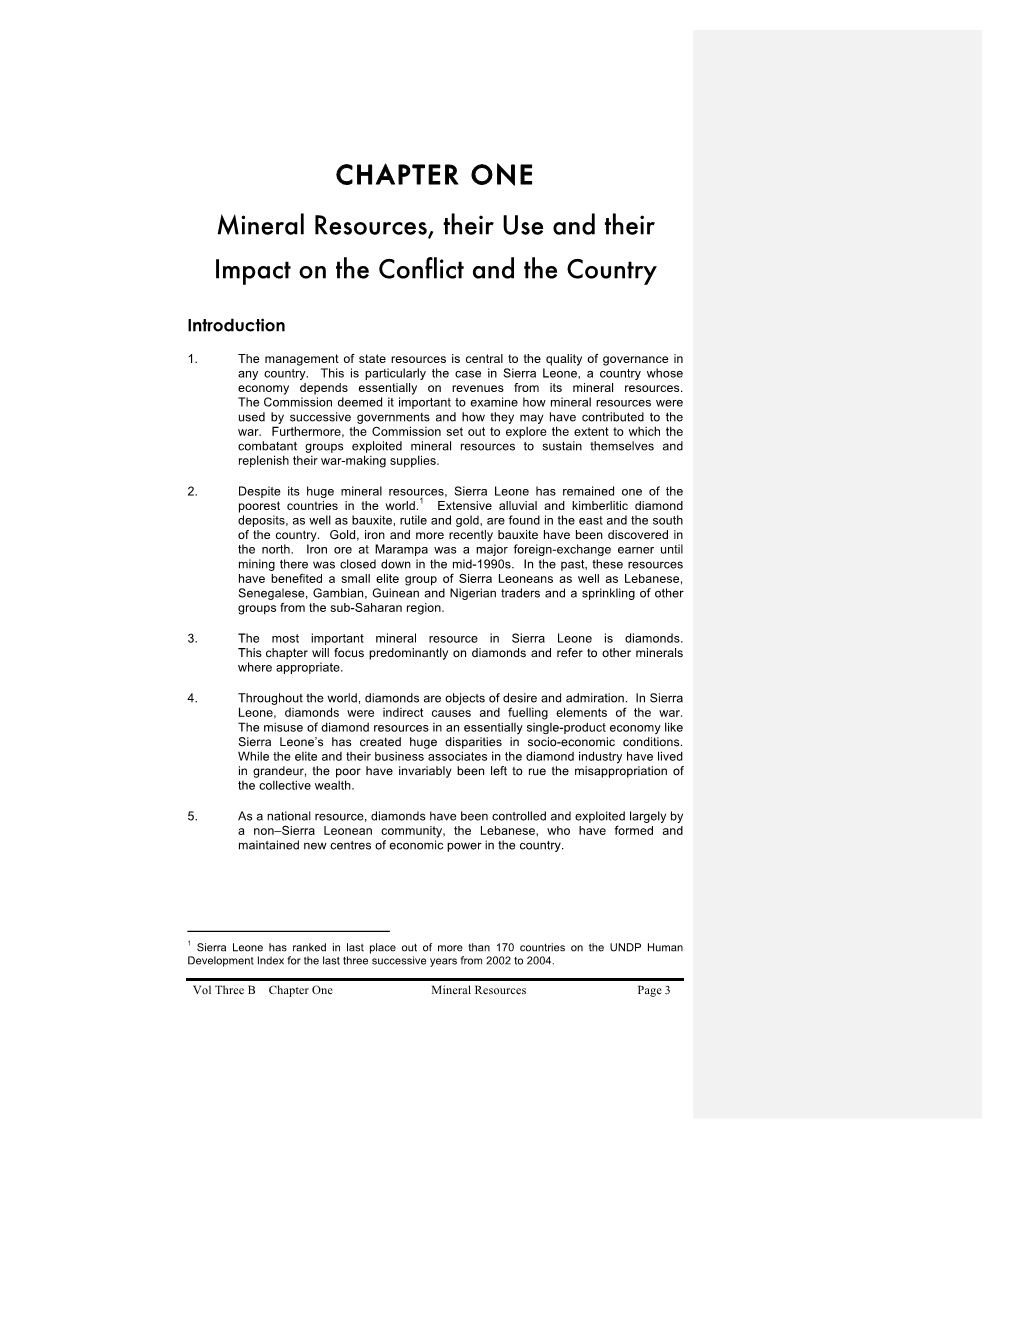 CHAPTER ONE Mineral Resources, Their Use and Their Impact on the Conflict and the Country